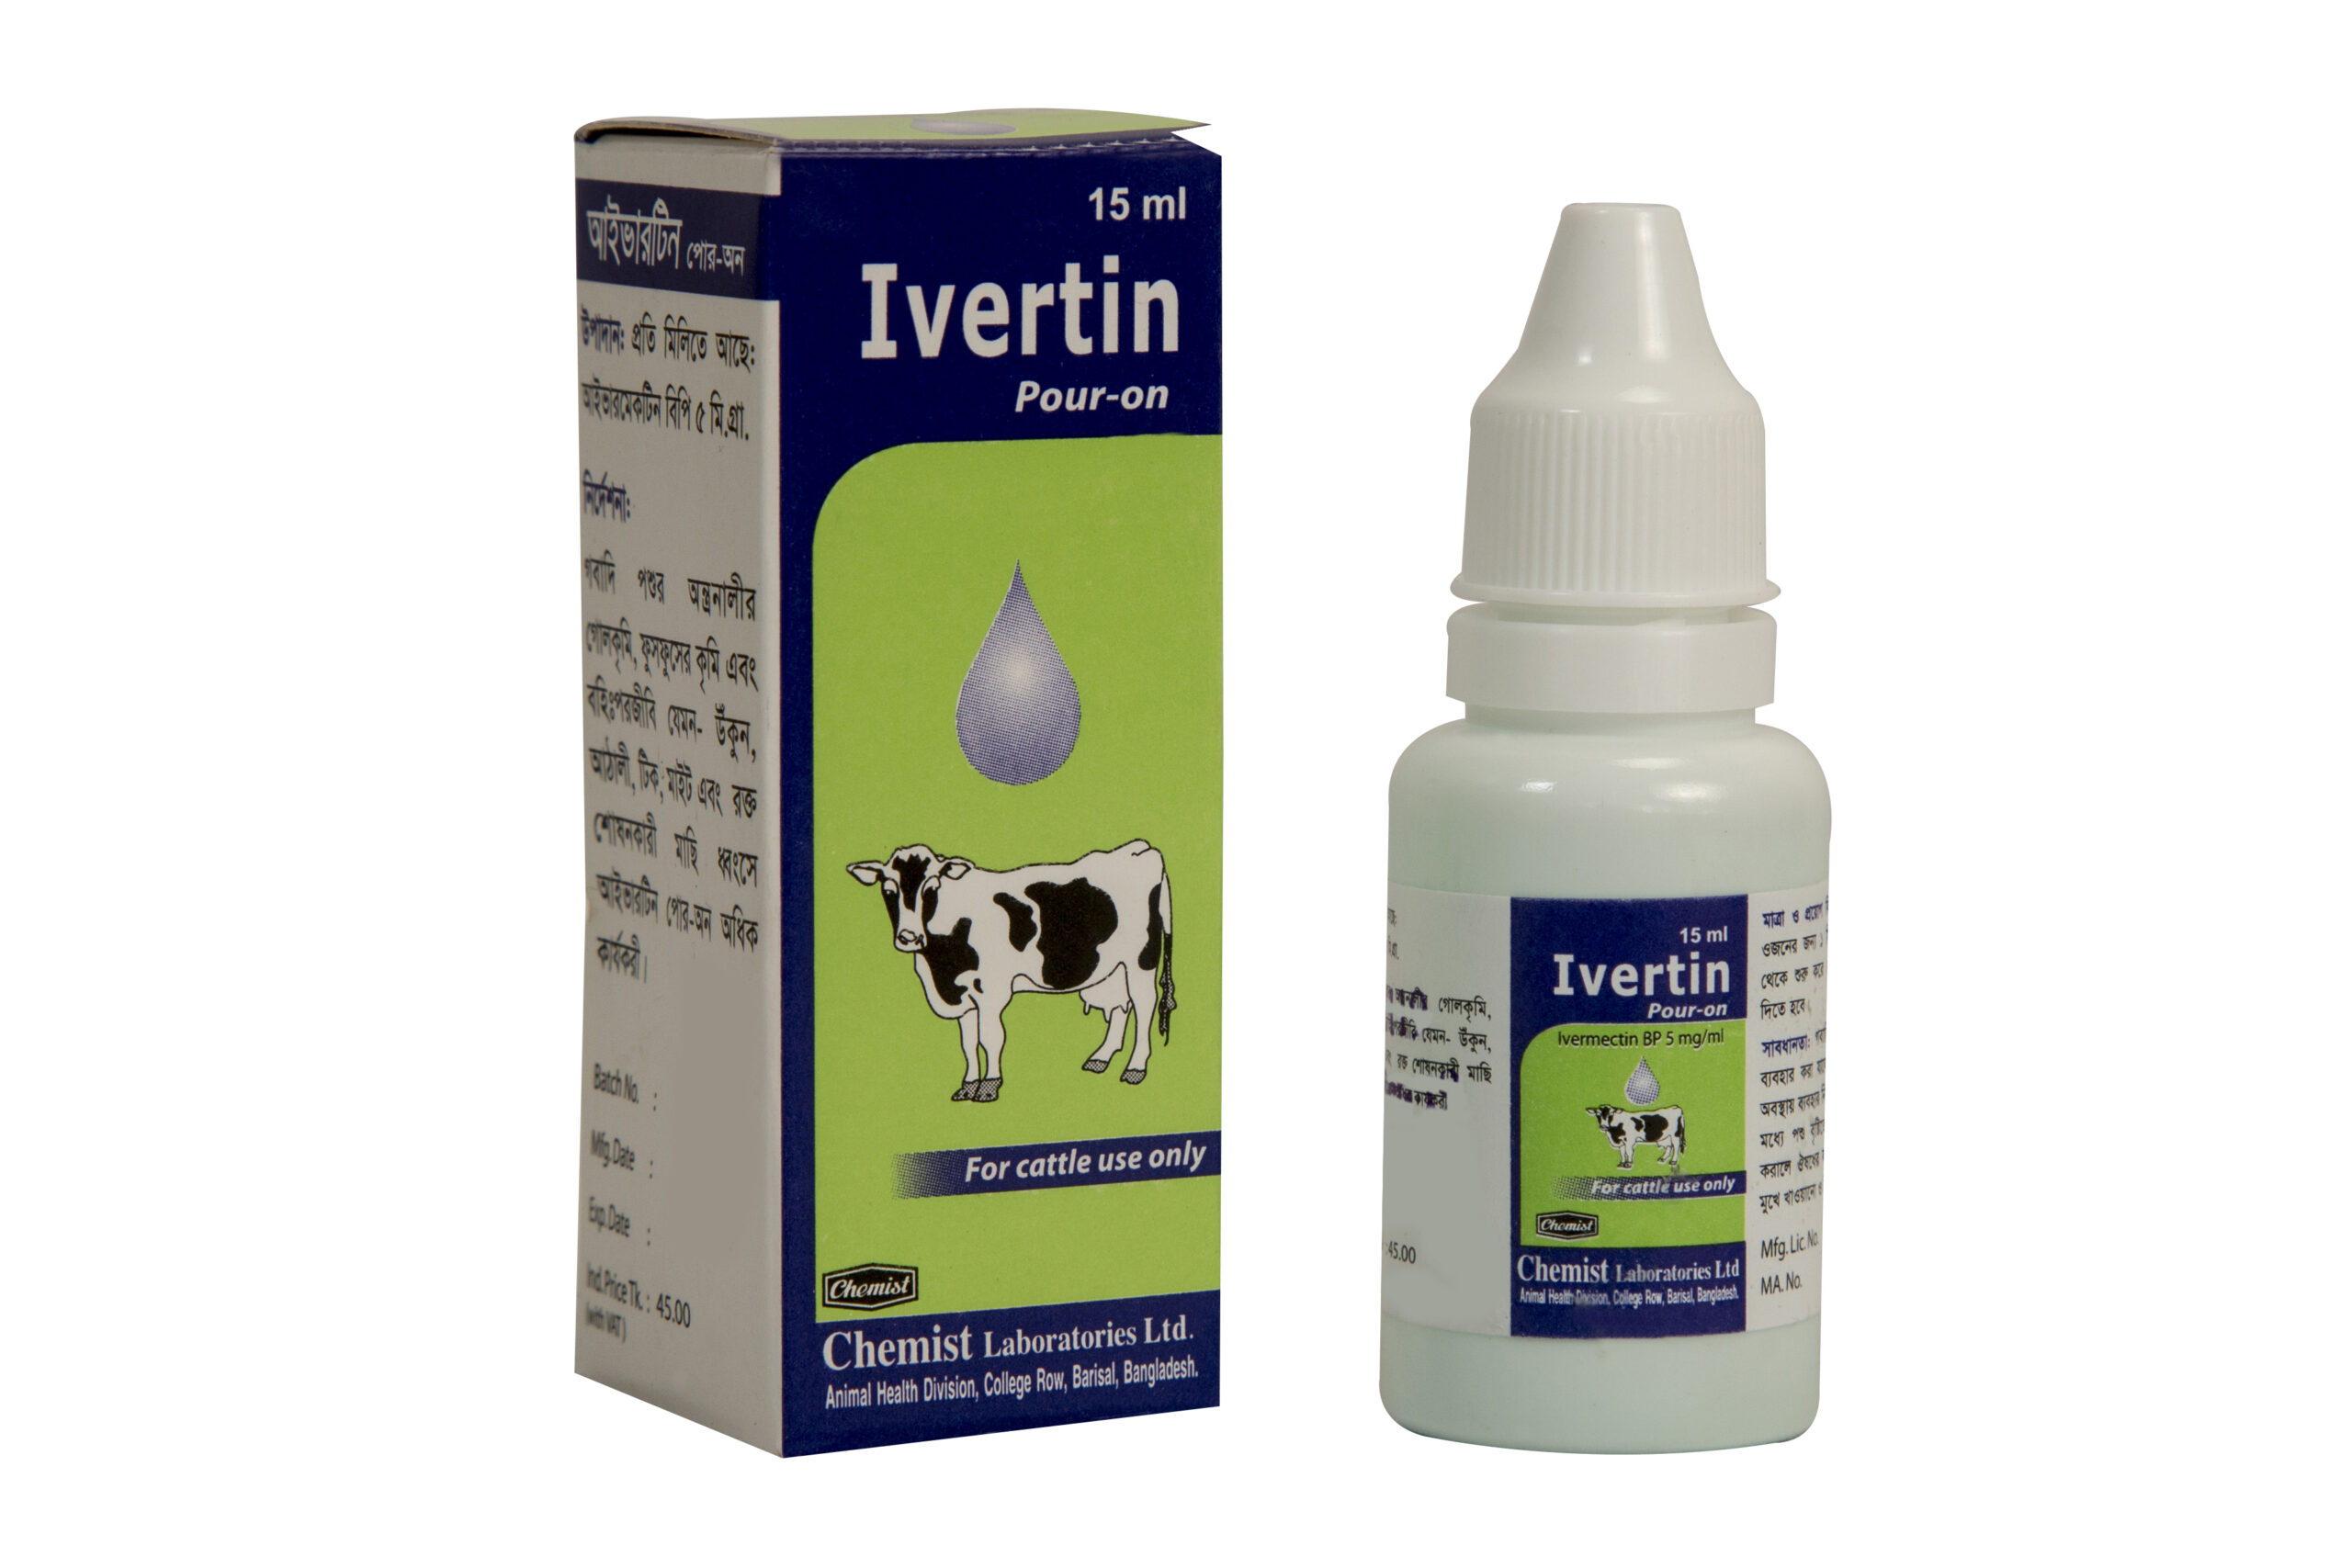 IVERTIN POUR-ON SOLUTION main image